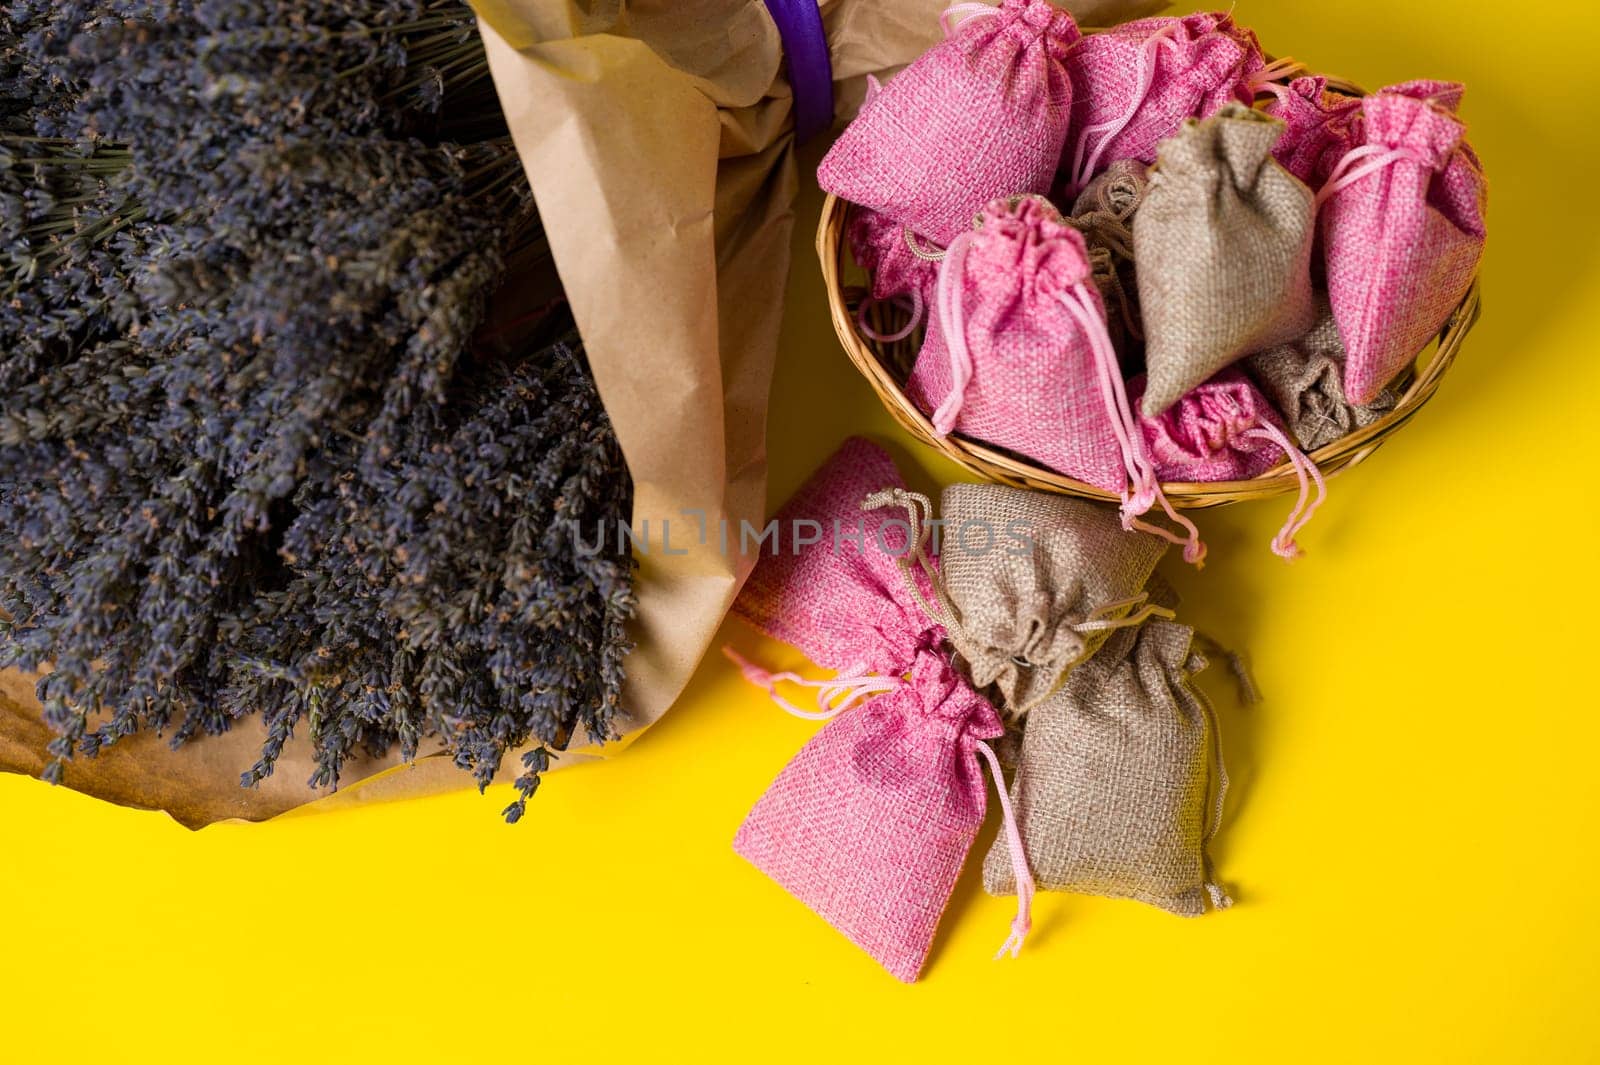 Dried lavender flowers and sachets on yellow background, lavender aromatherapy.